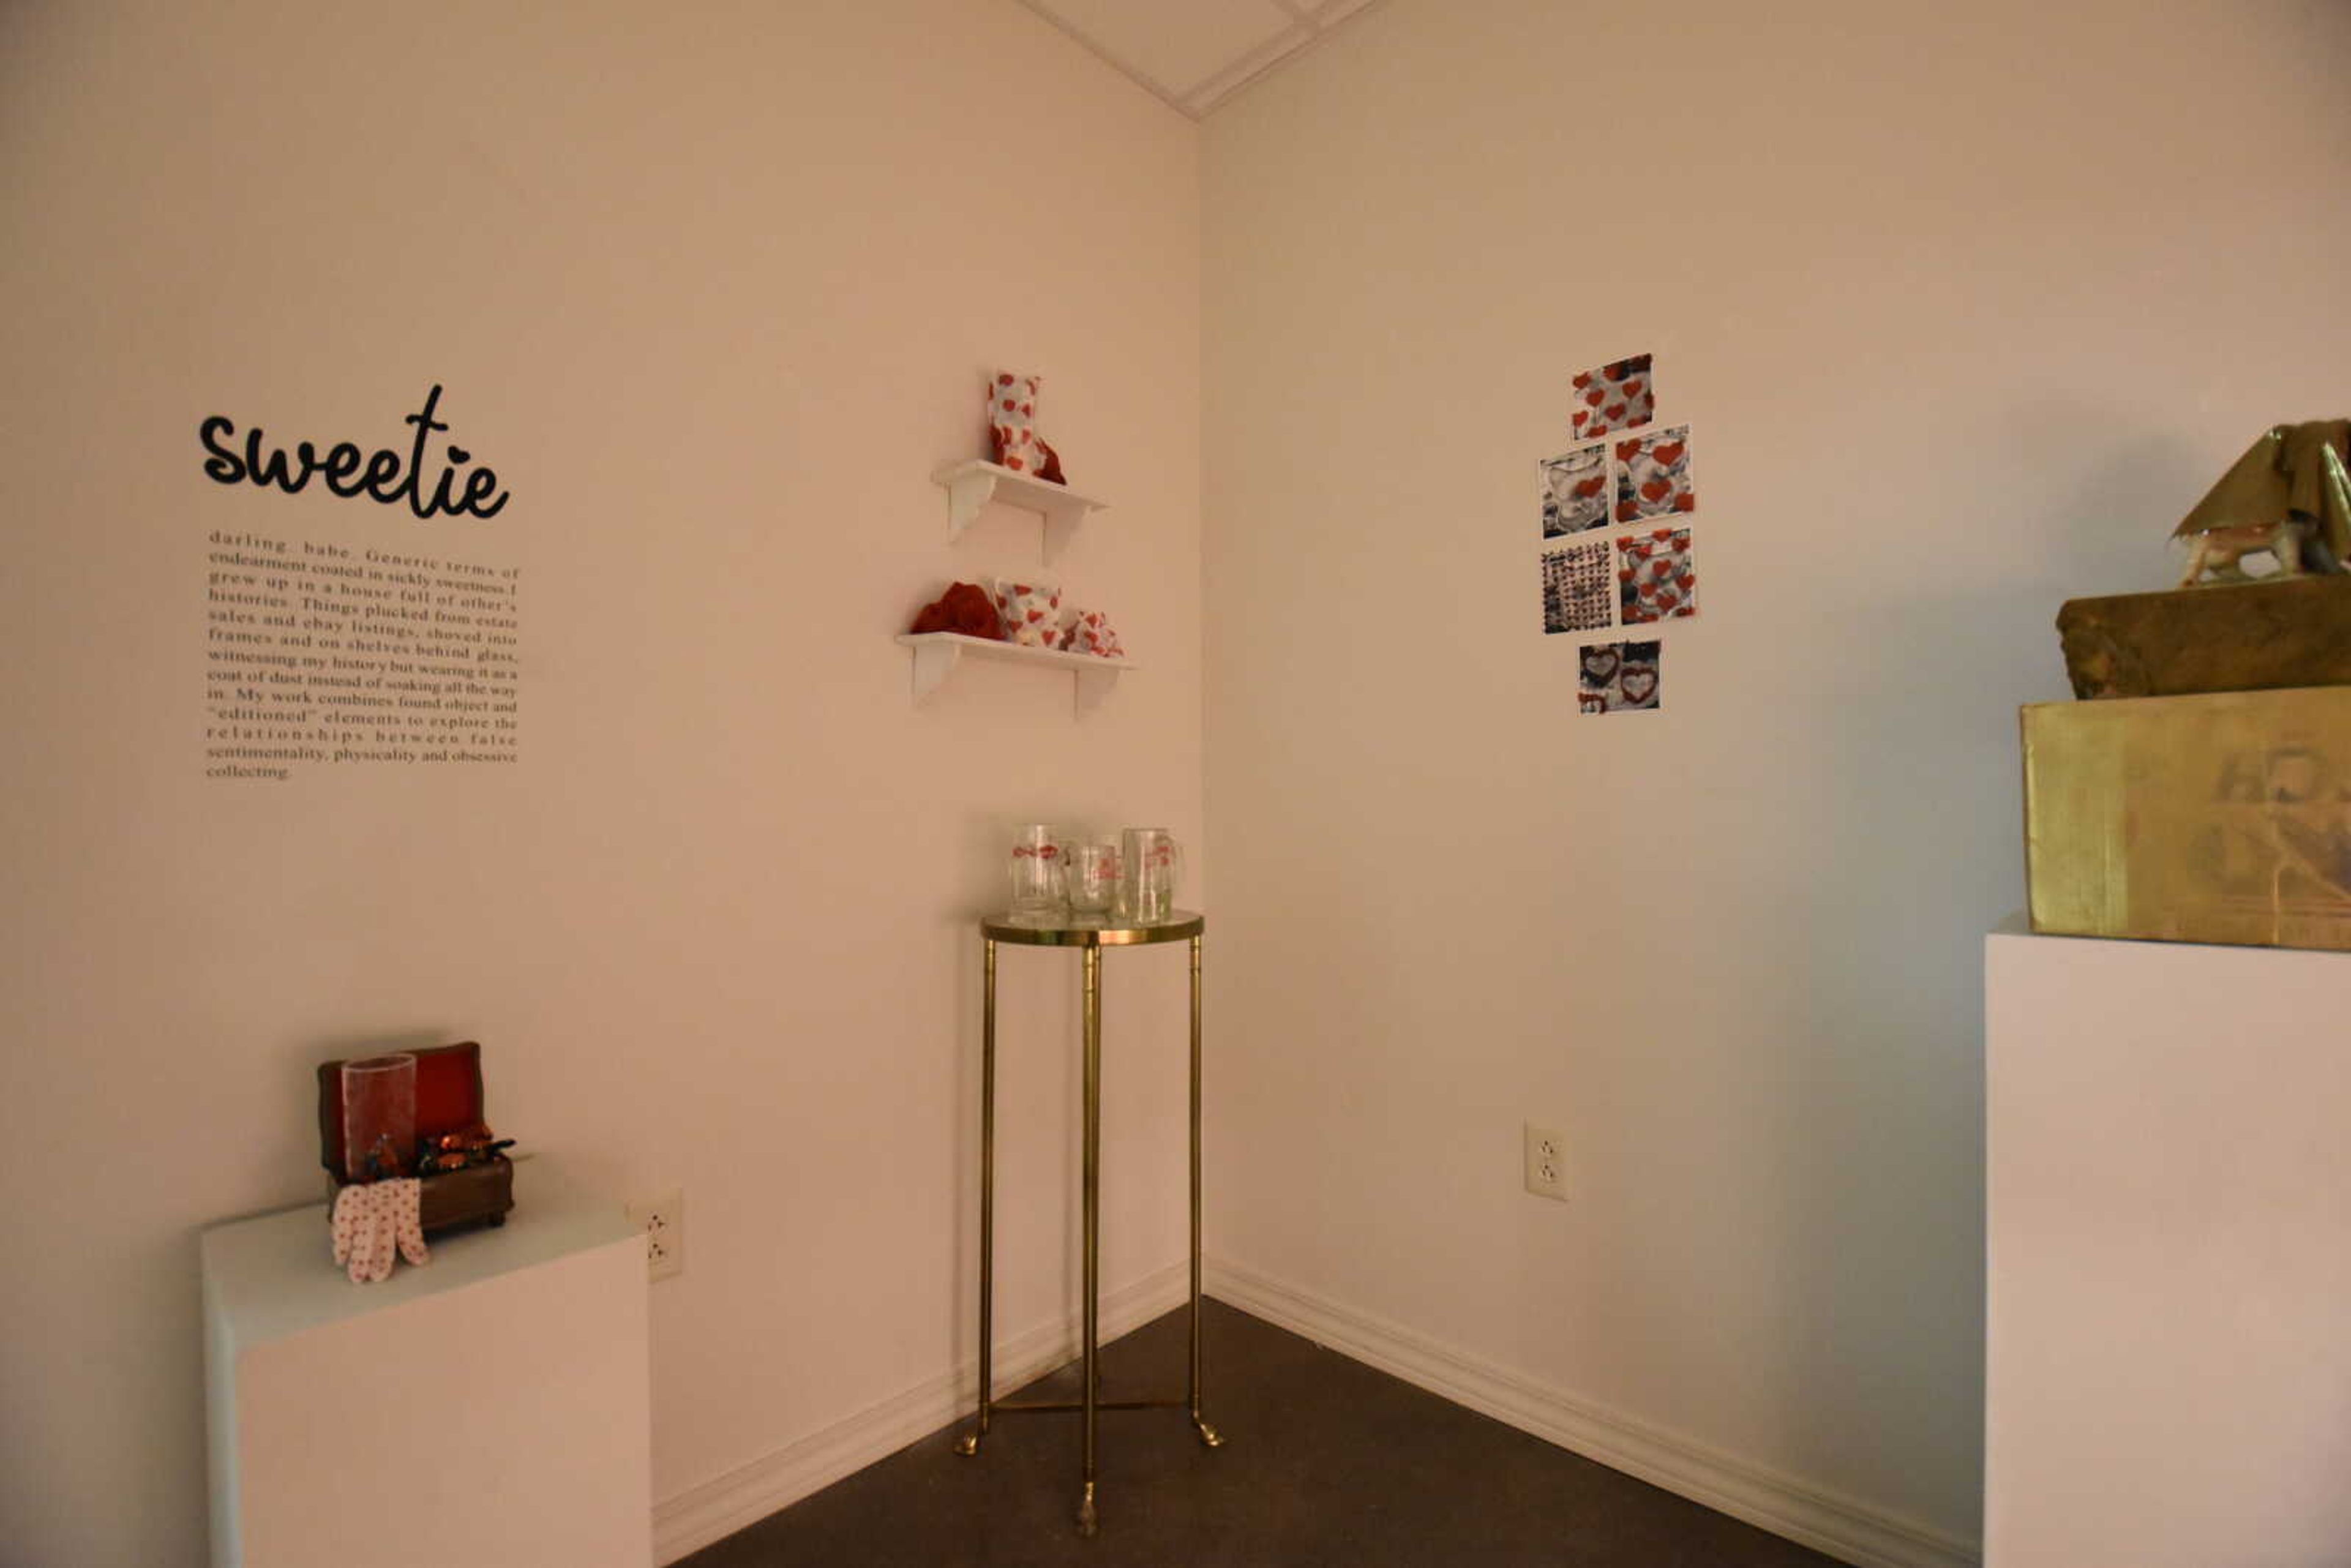 Sweetie solo exhibition by Southeast's alumna Ashley Sexton at the Micro-Galleries of the Arts Council of Southeast Missouri